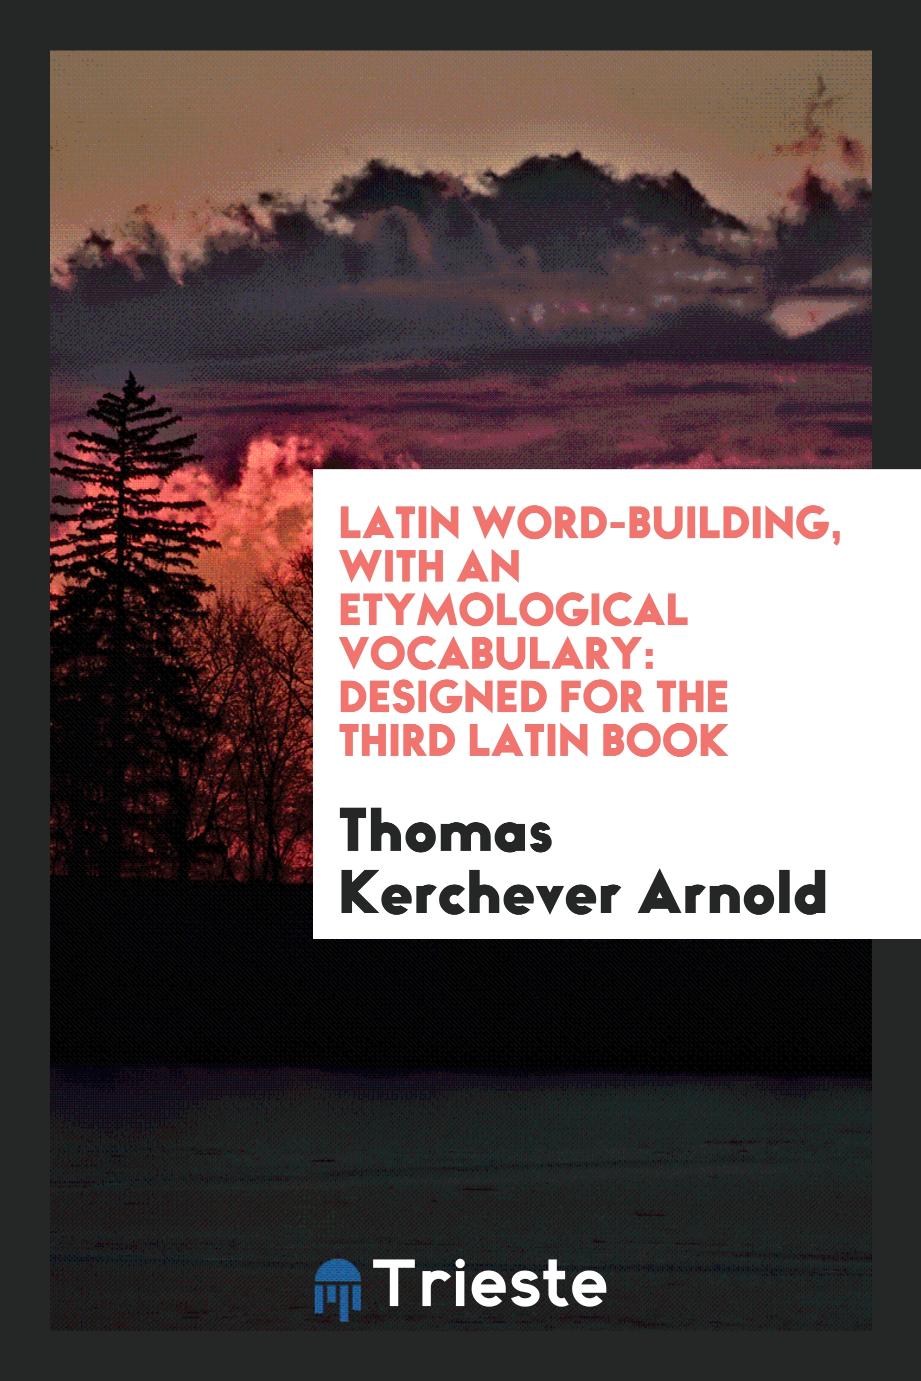 Latin Word-Building, with an Etymological Vocabulary: Designed for the Third Latin Book